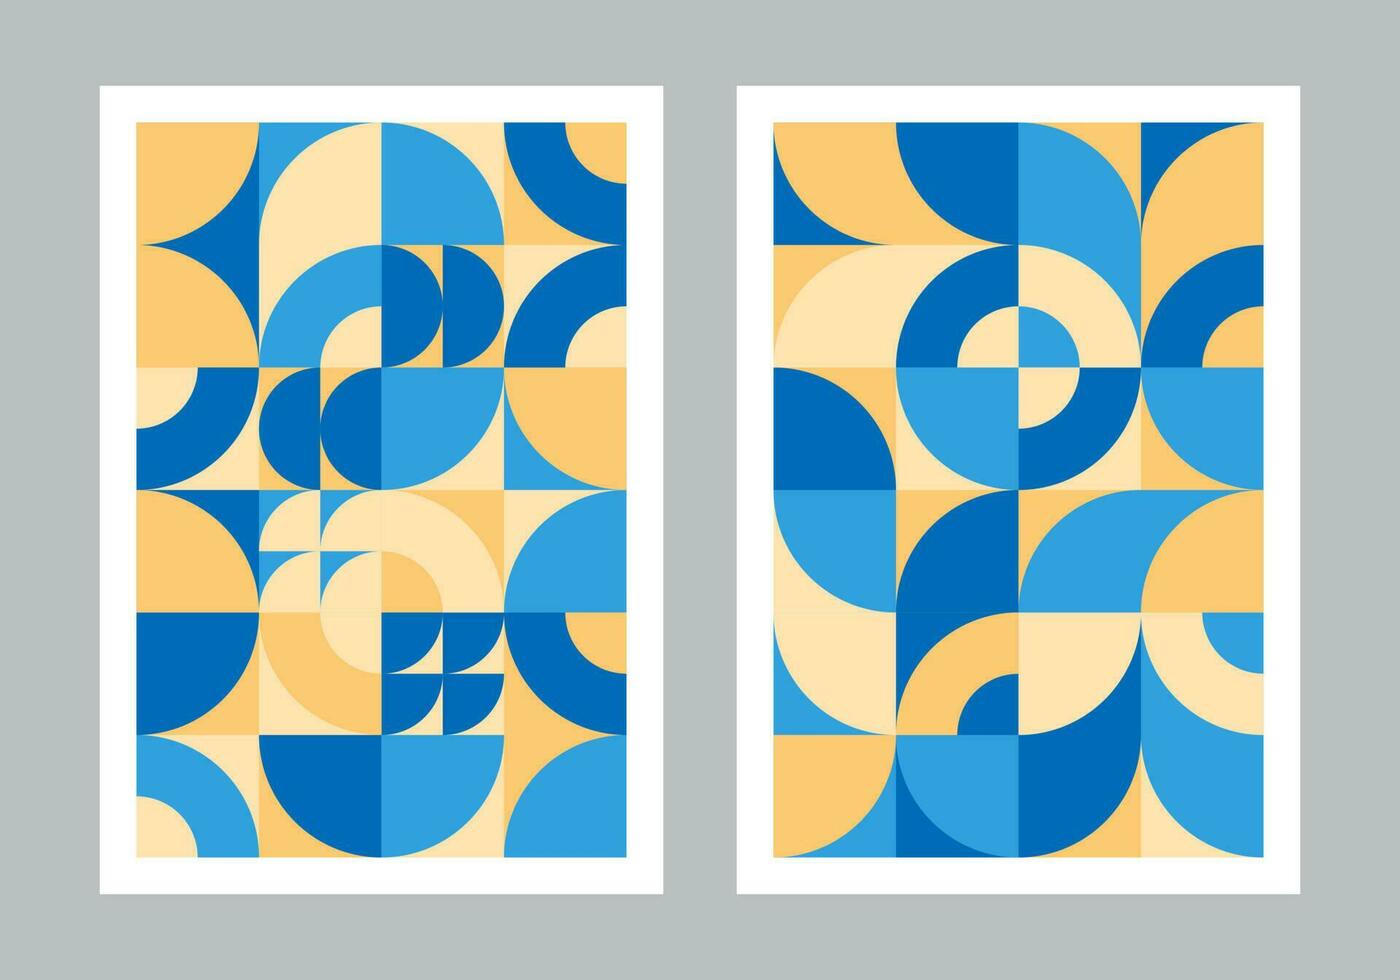 Abstract geometric pattern background. Bauhaus art style. Circle, semicircle, square shapes. Yellow, orange, blue color. Design for print, cover, poster, flyer, banner, wall. Vector illustration.